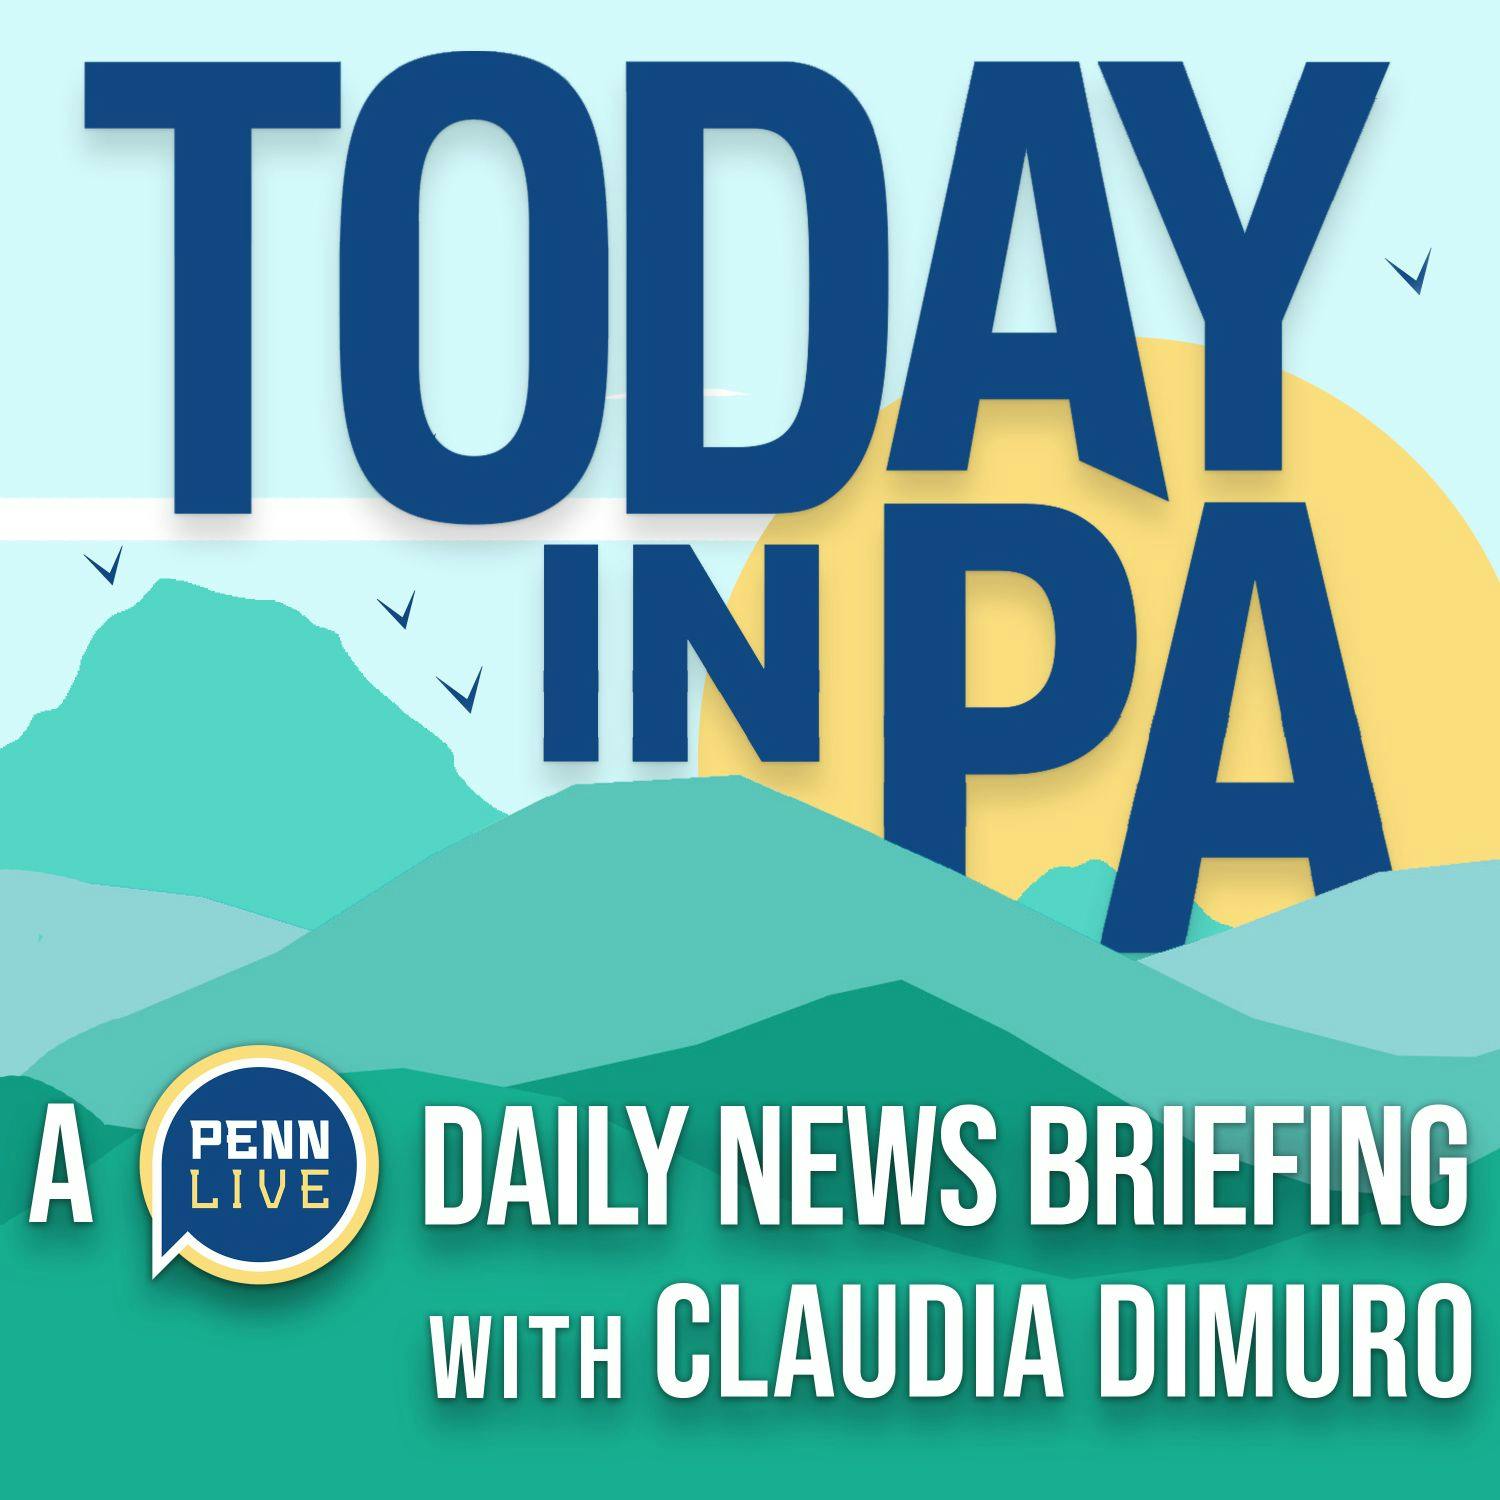 Today in PA | A PennLive daily news briefing with Claudia Dimuro